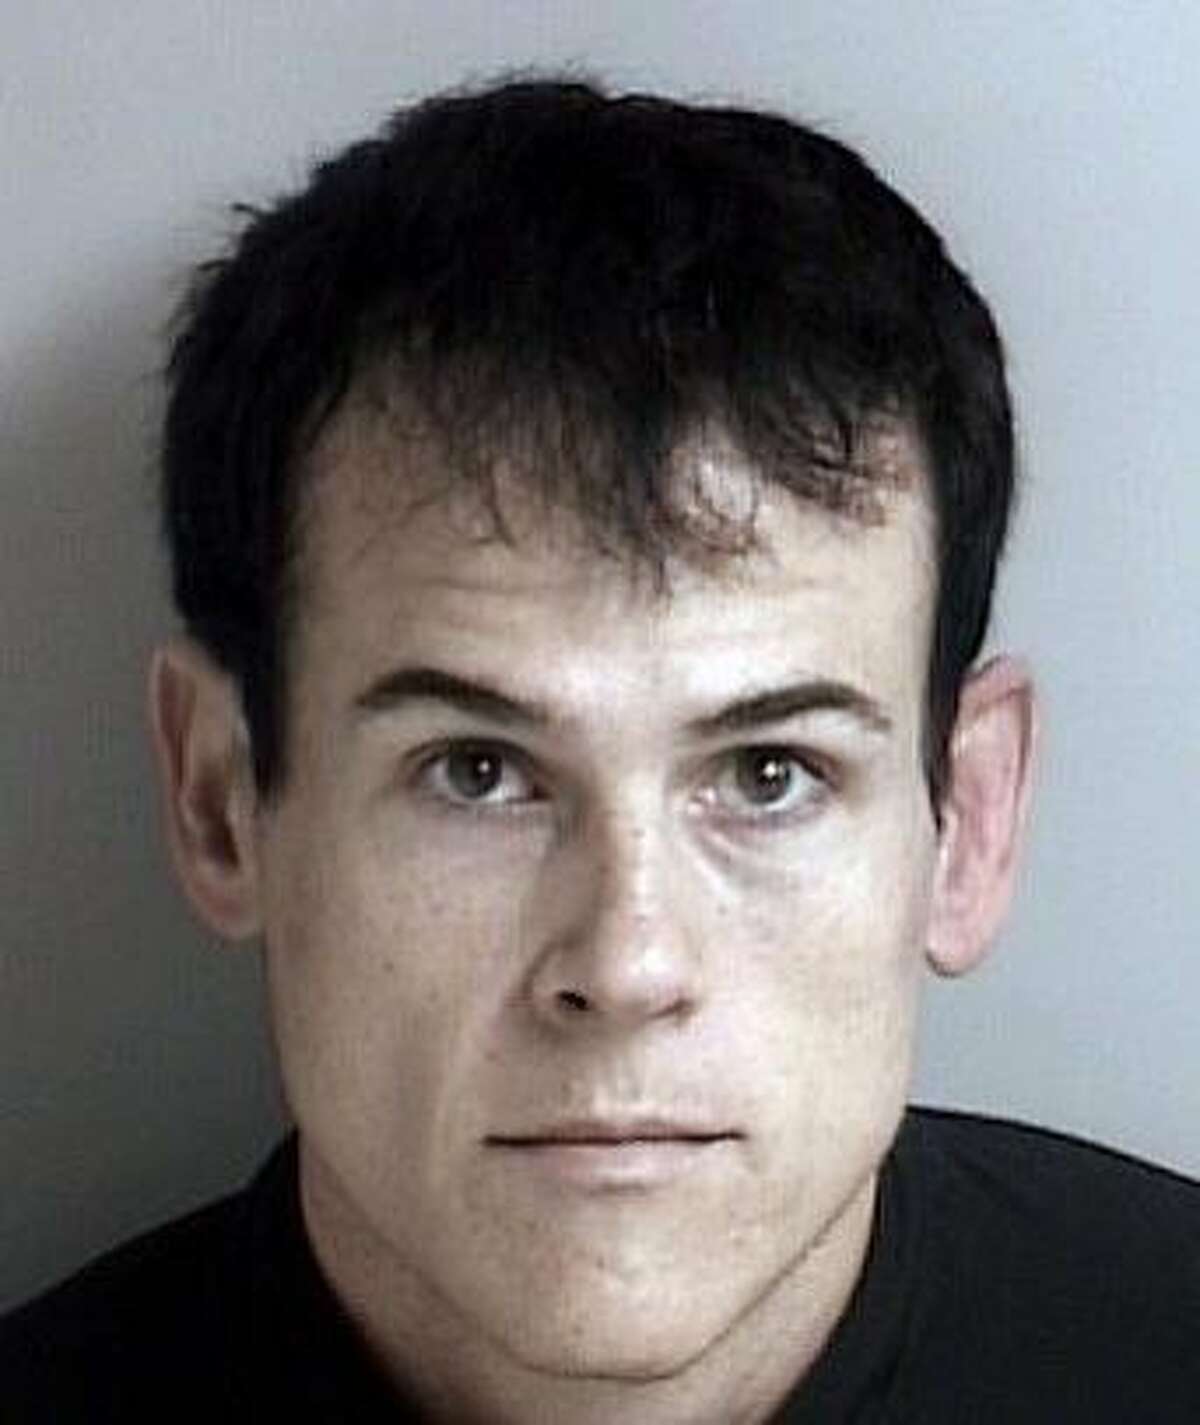 This June 2015 booking photo released by the Dublin, Calif., Police Department, shows Matthew Muller after he was arrested on robbery and assault charges. On Monday, July 13, 2015, Muller was named as a suspect in the kidnapping and sexual assault of a woman from Vallejo in March of 2015 that police originally believed was a hoax. (Dublin Police Department via AP)